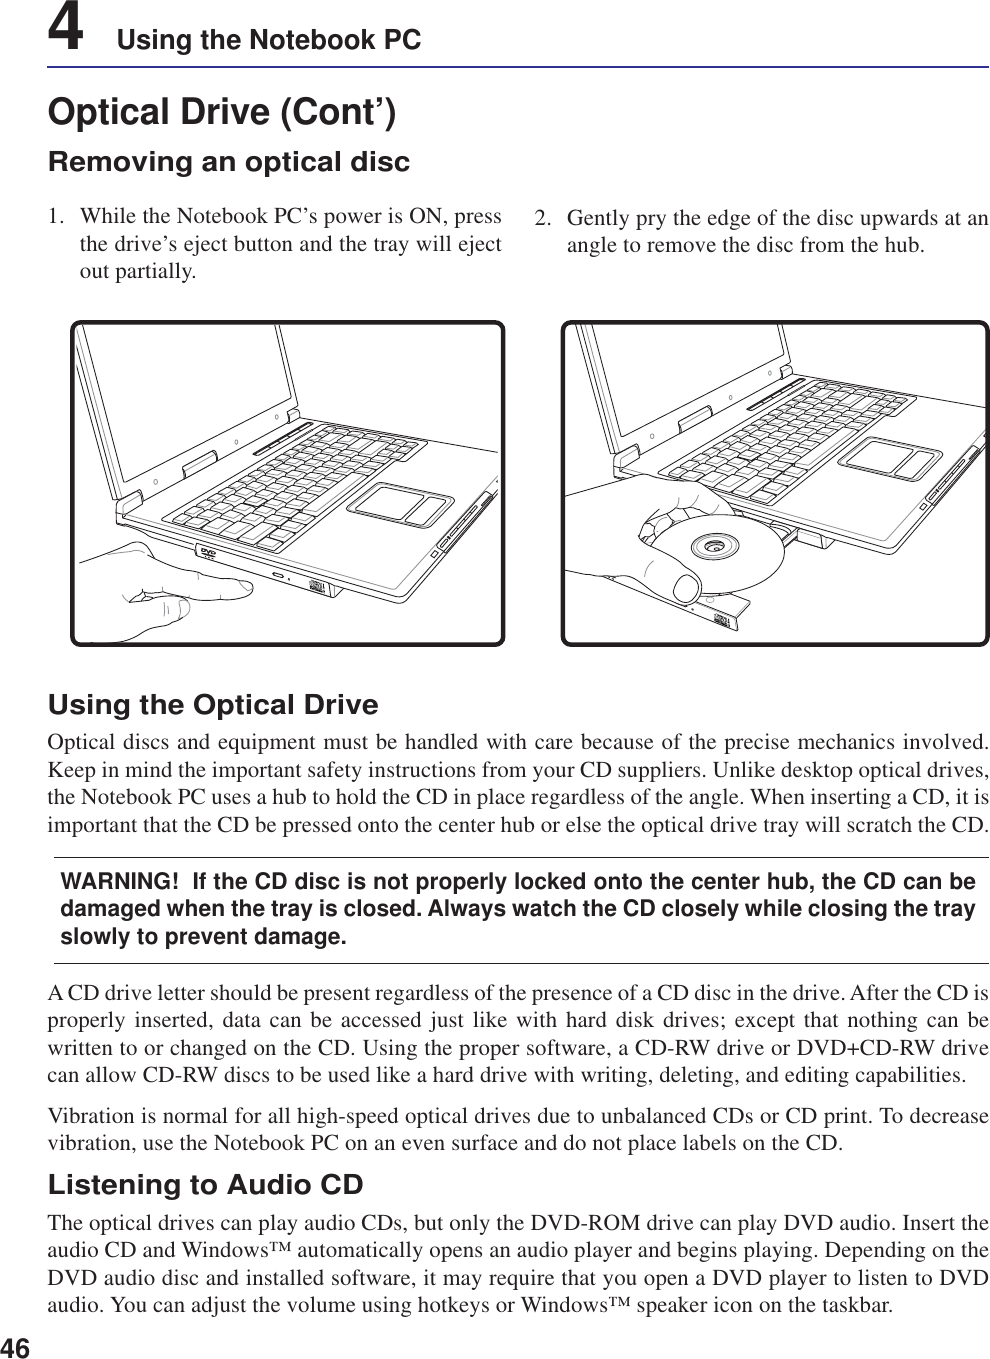 464    Using the Notebook PCA CD drive letter should be present regardless of the presence of a CD disc in the drive. After the CD isproperly inserted, data can be accessed just like with hard disk drives; except that nothing can bewritten to or changed on the CD. Using the proper software, a CD-RW drive or DVD+CD-RW drivecan allow CD-RW discs to be used like a hard drive with writing, deleting, and editing capabilities.Vibration is normal for all high-speed optical drives due to unbalanced CDs or CD print. To decreasevibration, use the Notebook PC on an even surface and do not place labels on the CD.Listening to Audio CDThe optical drives can play audio CDs, but only the DVD-ROM drive can play DVD audio. Insert theaudio CD and Windows™ automatically opens an audio player and begins playing. Depending on theDVD audio disc and installed software, it may require that you open a DVD player to listen to DVDaudio. You can adjust the volume using hotkeys or Windows™ speaker icon on the taskbar.Using the Optical DriveOptical discs and equipment must be handled with care because of the precise mechanics involved.Keep in mind the important safety instructions from your CD suppliers. Unlike desktop optical drives,the Notebook PC uses a hub to hold the CD in place regardless of the angle. When inserting a CD, it isimportant that the CD be pressed onto the center hub or else the optical drive tray will scratch the CD.WARNING!  If the CD disc is not properly locked onto the center hub, the CD can bedamaged when the tray is closed. Always watch the CD closely while closing the trayslowly to prevent damage.Optical Drive (Cont’)Removing an optical disc1. While the Notebook PC’s power is ON, pressthe drive’s eject button and the tray will ejectout partially.2. Gently pry the edge of the disc upwards at anangle to remove the disc from the hub.31